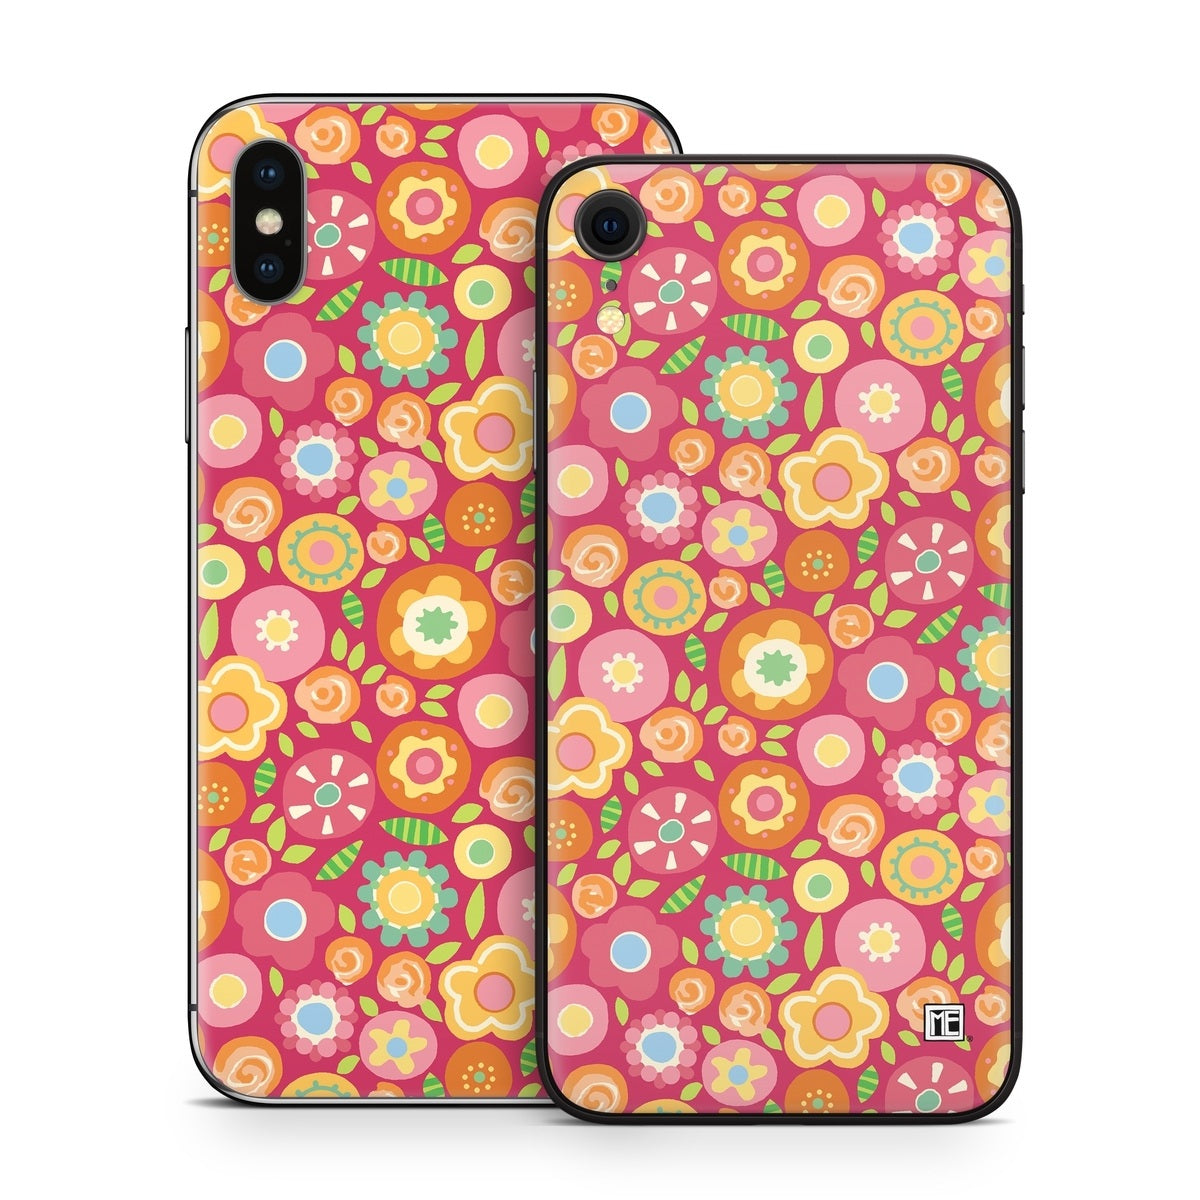 Flowers Squished - Apple iPhone X Skin